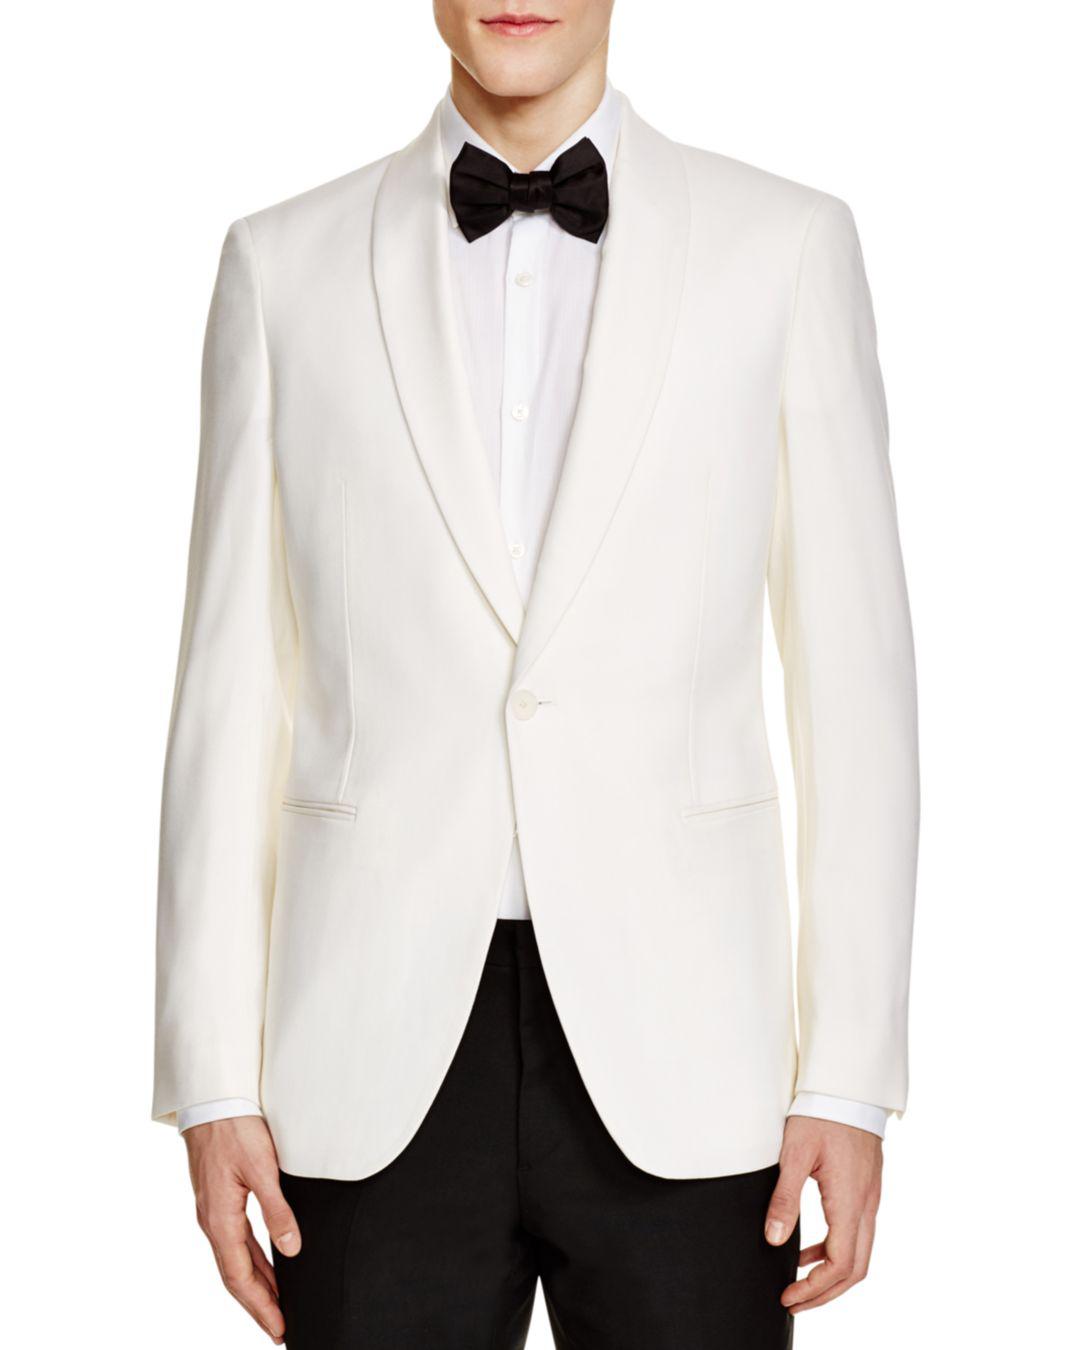 Theory Weller Shawl Collar Jacket in White for Men - Lyst